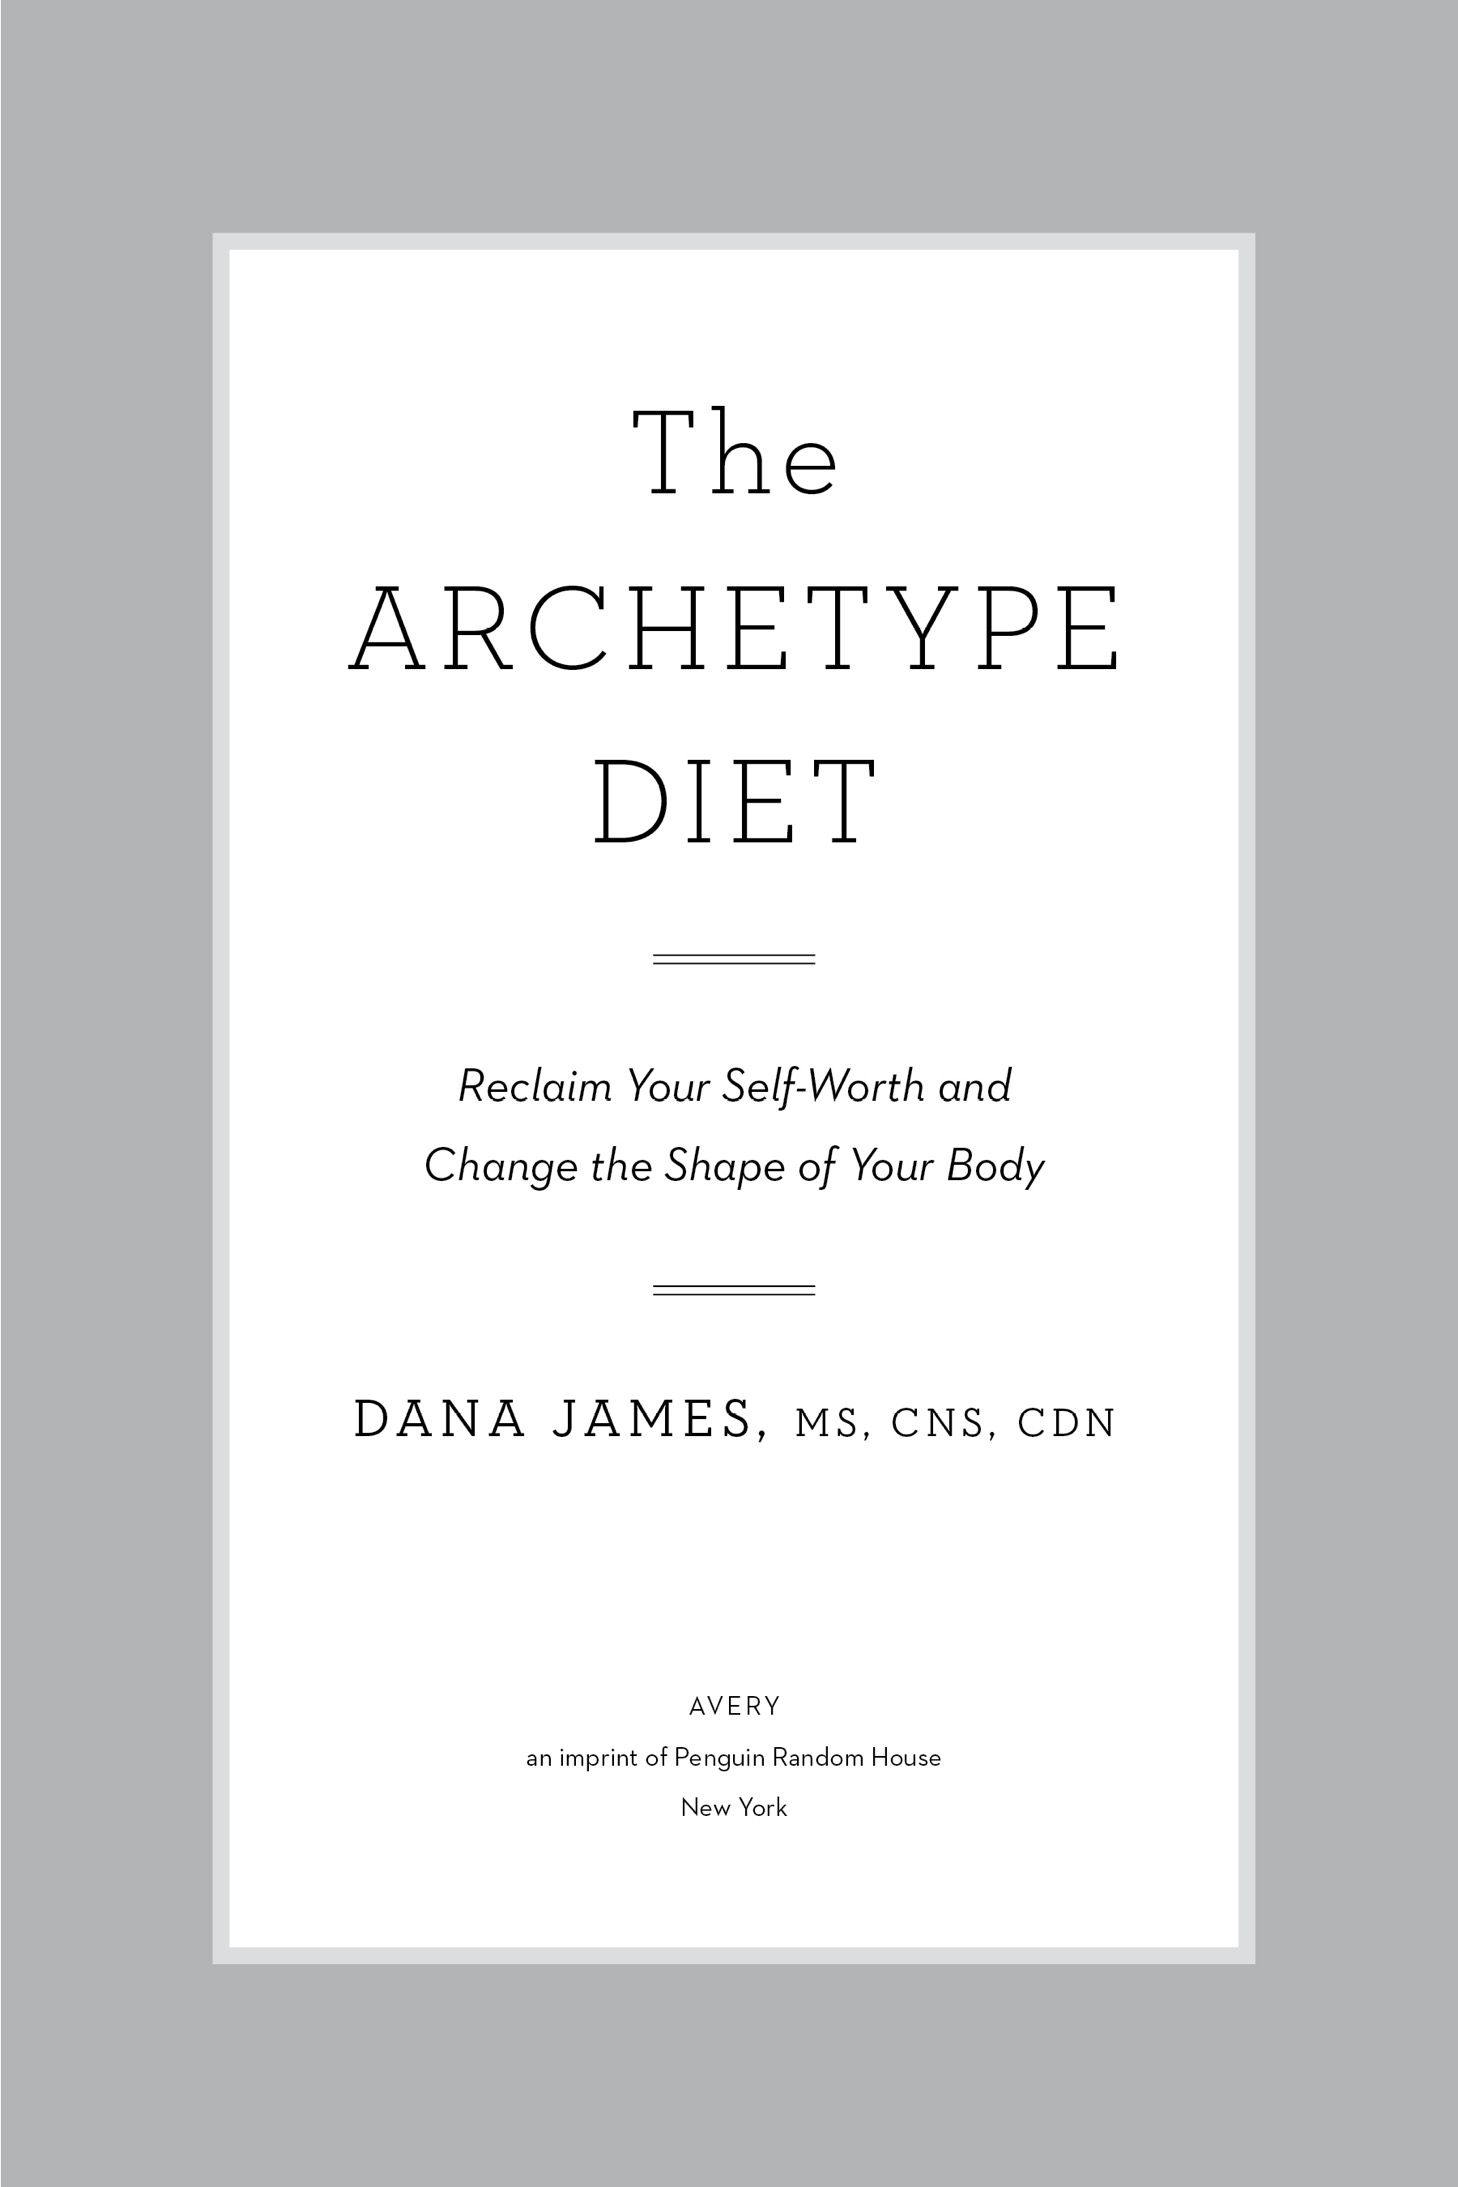 The Archetype Diet Reclaim Your Self-Worth and Change the Shape of Your Body - image 2